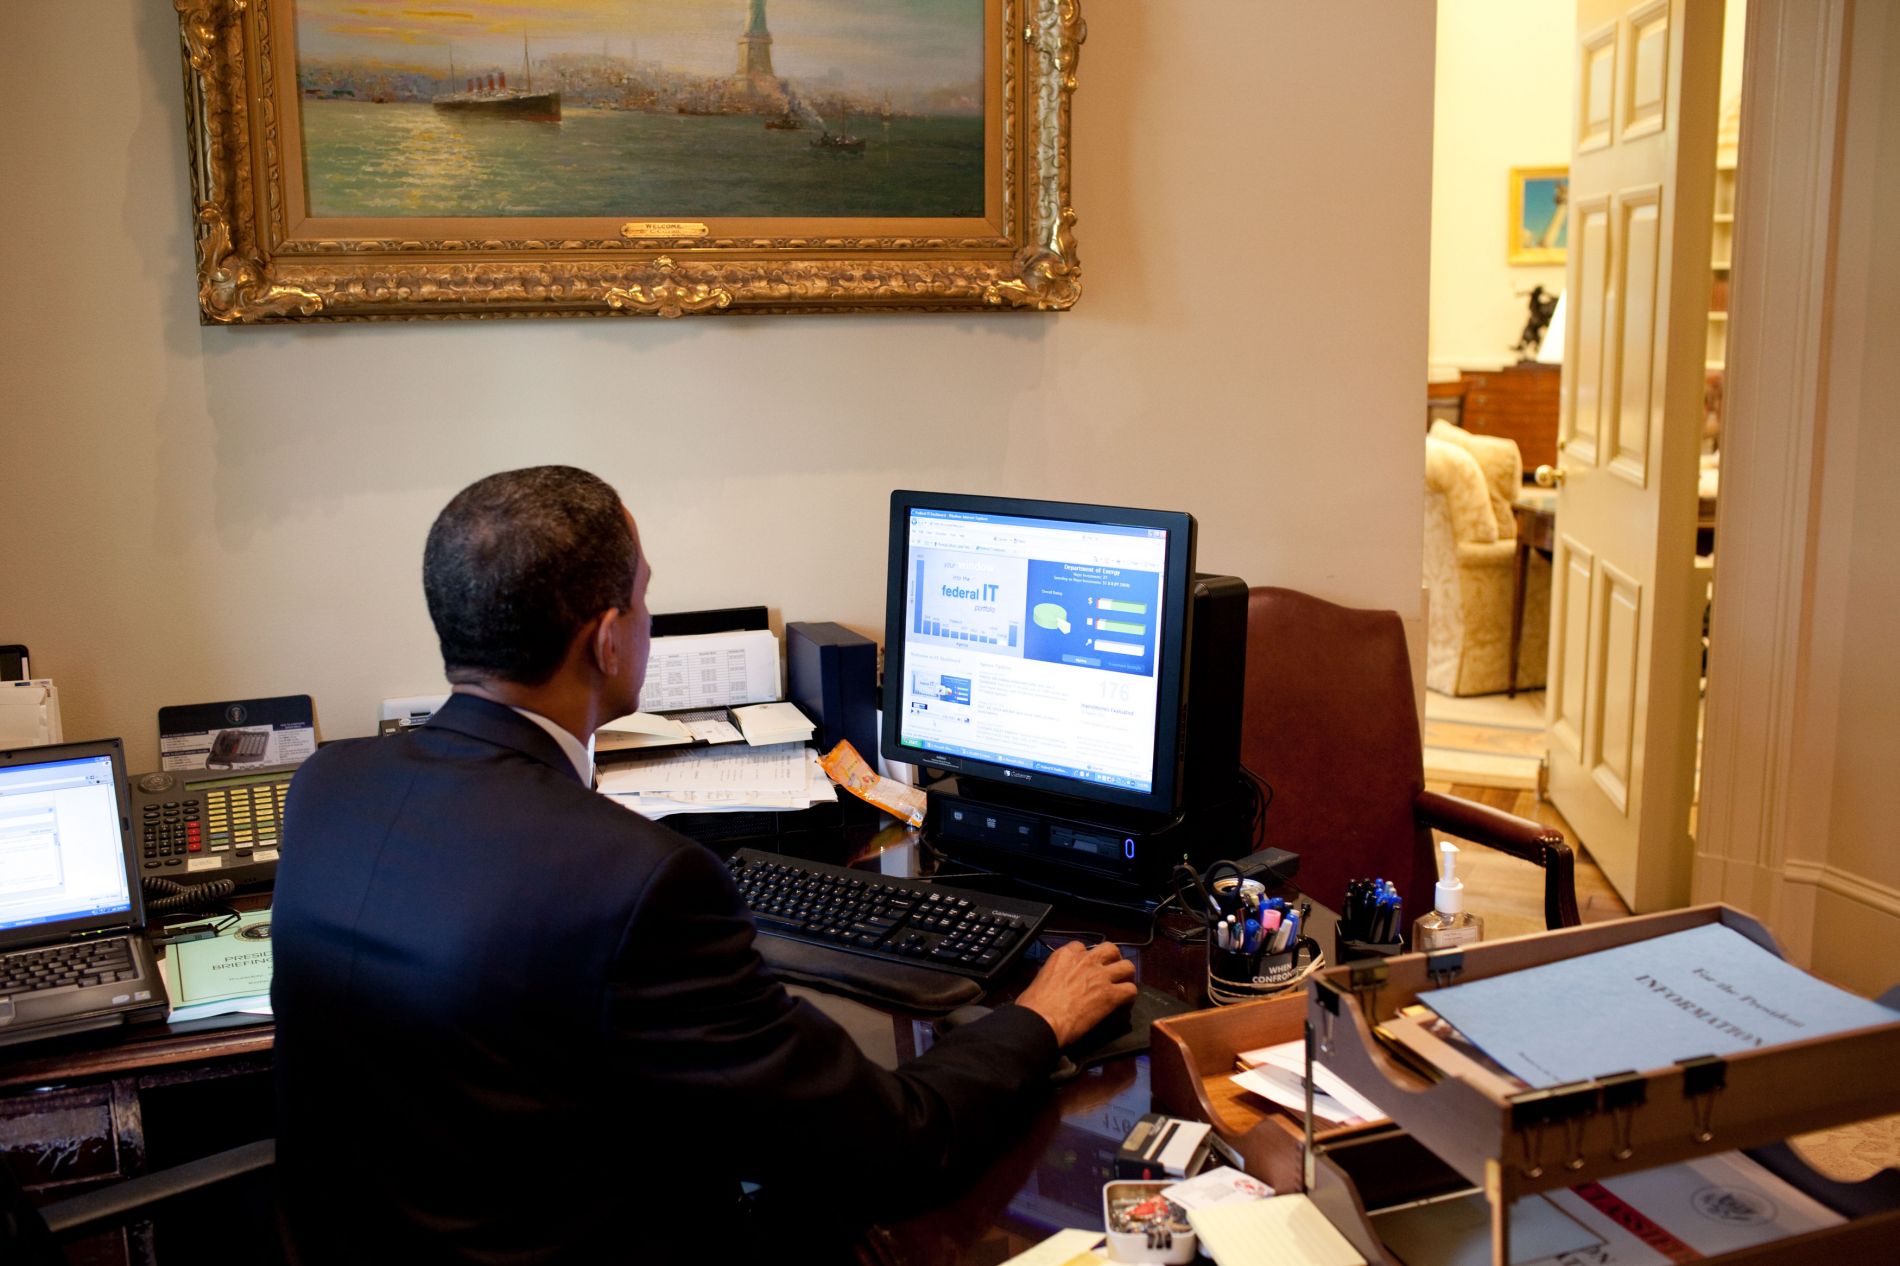 Obama testing the Federal Government IT Dashboard by Pete Souza via Wikimedia Commons